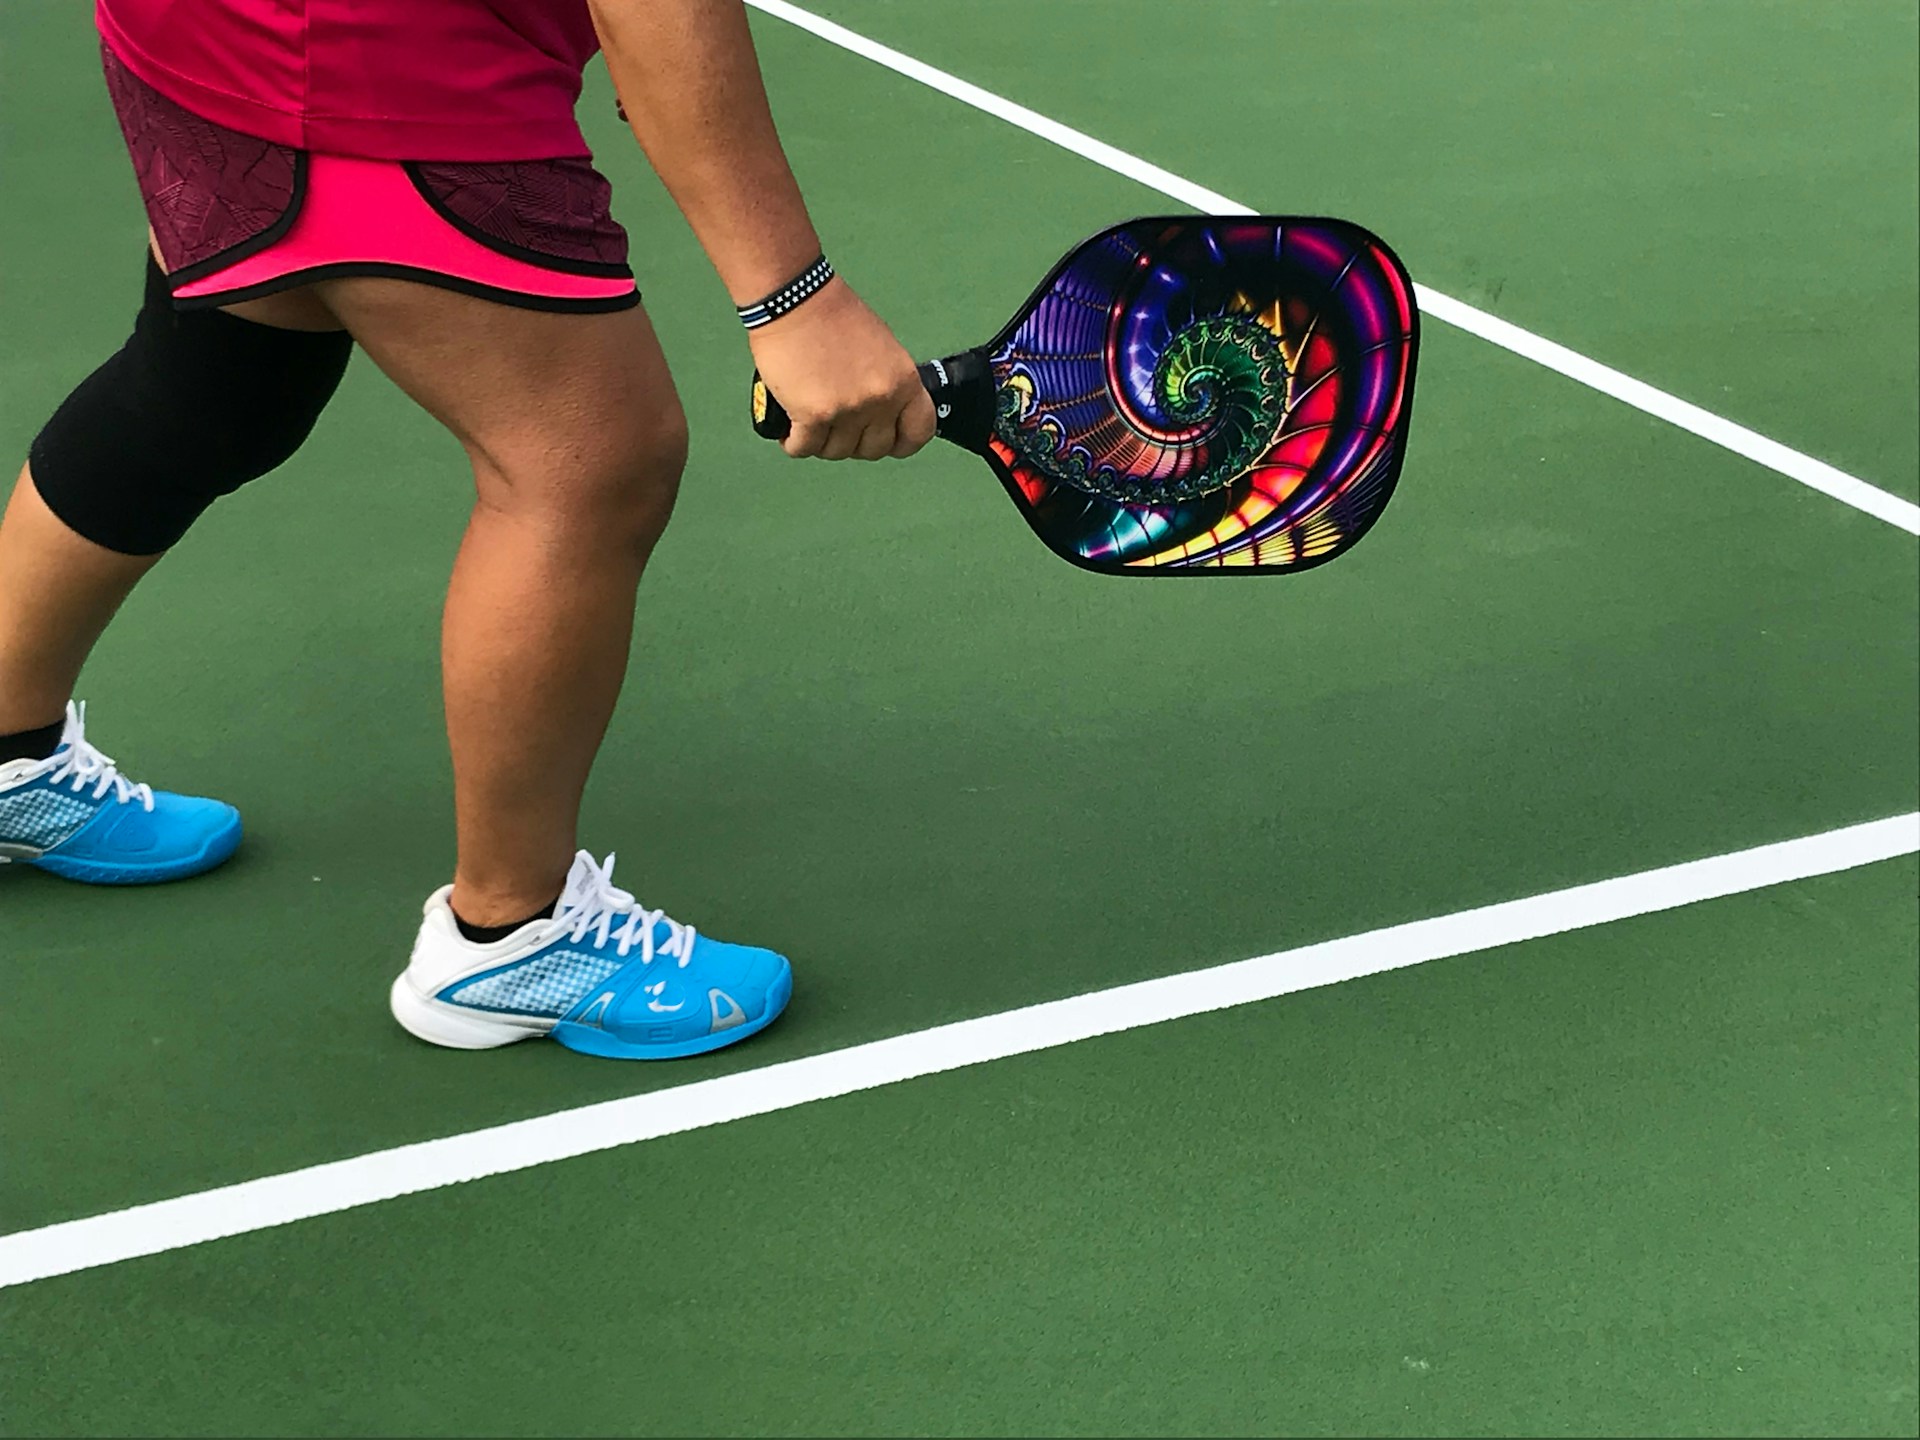 athlete in ready position holding a colorful pickleball racket on a court in the daytime